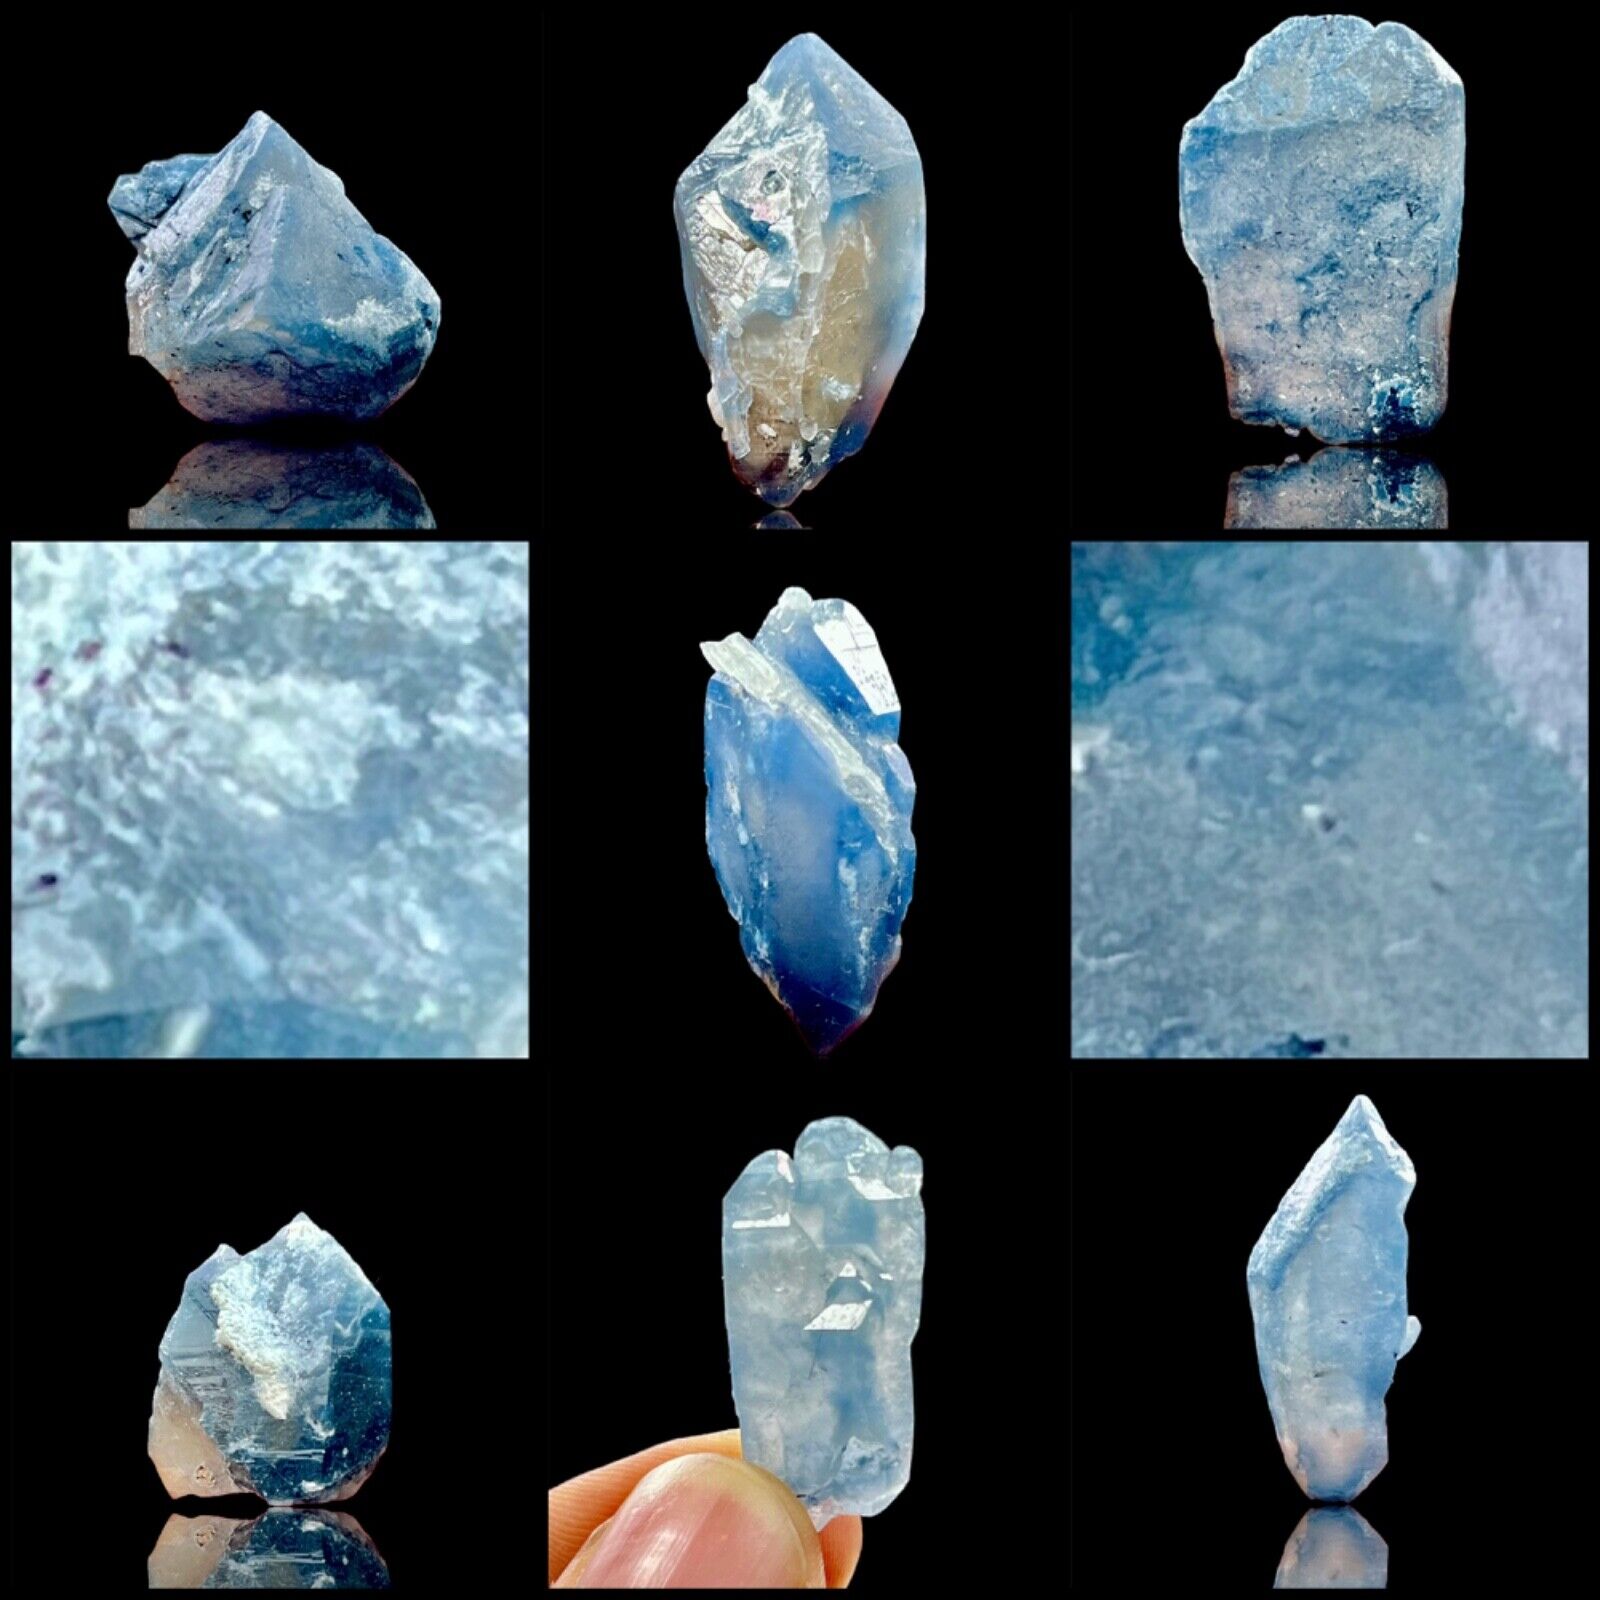 100 Gram beautiful 7 pieces of Blue Quartz crystals from Afghanistan.